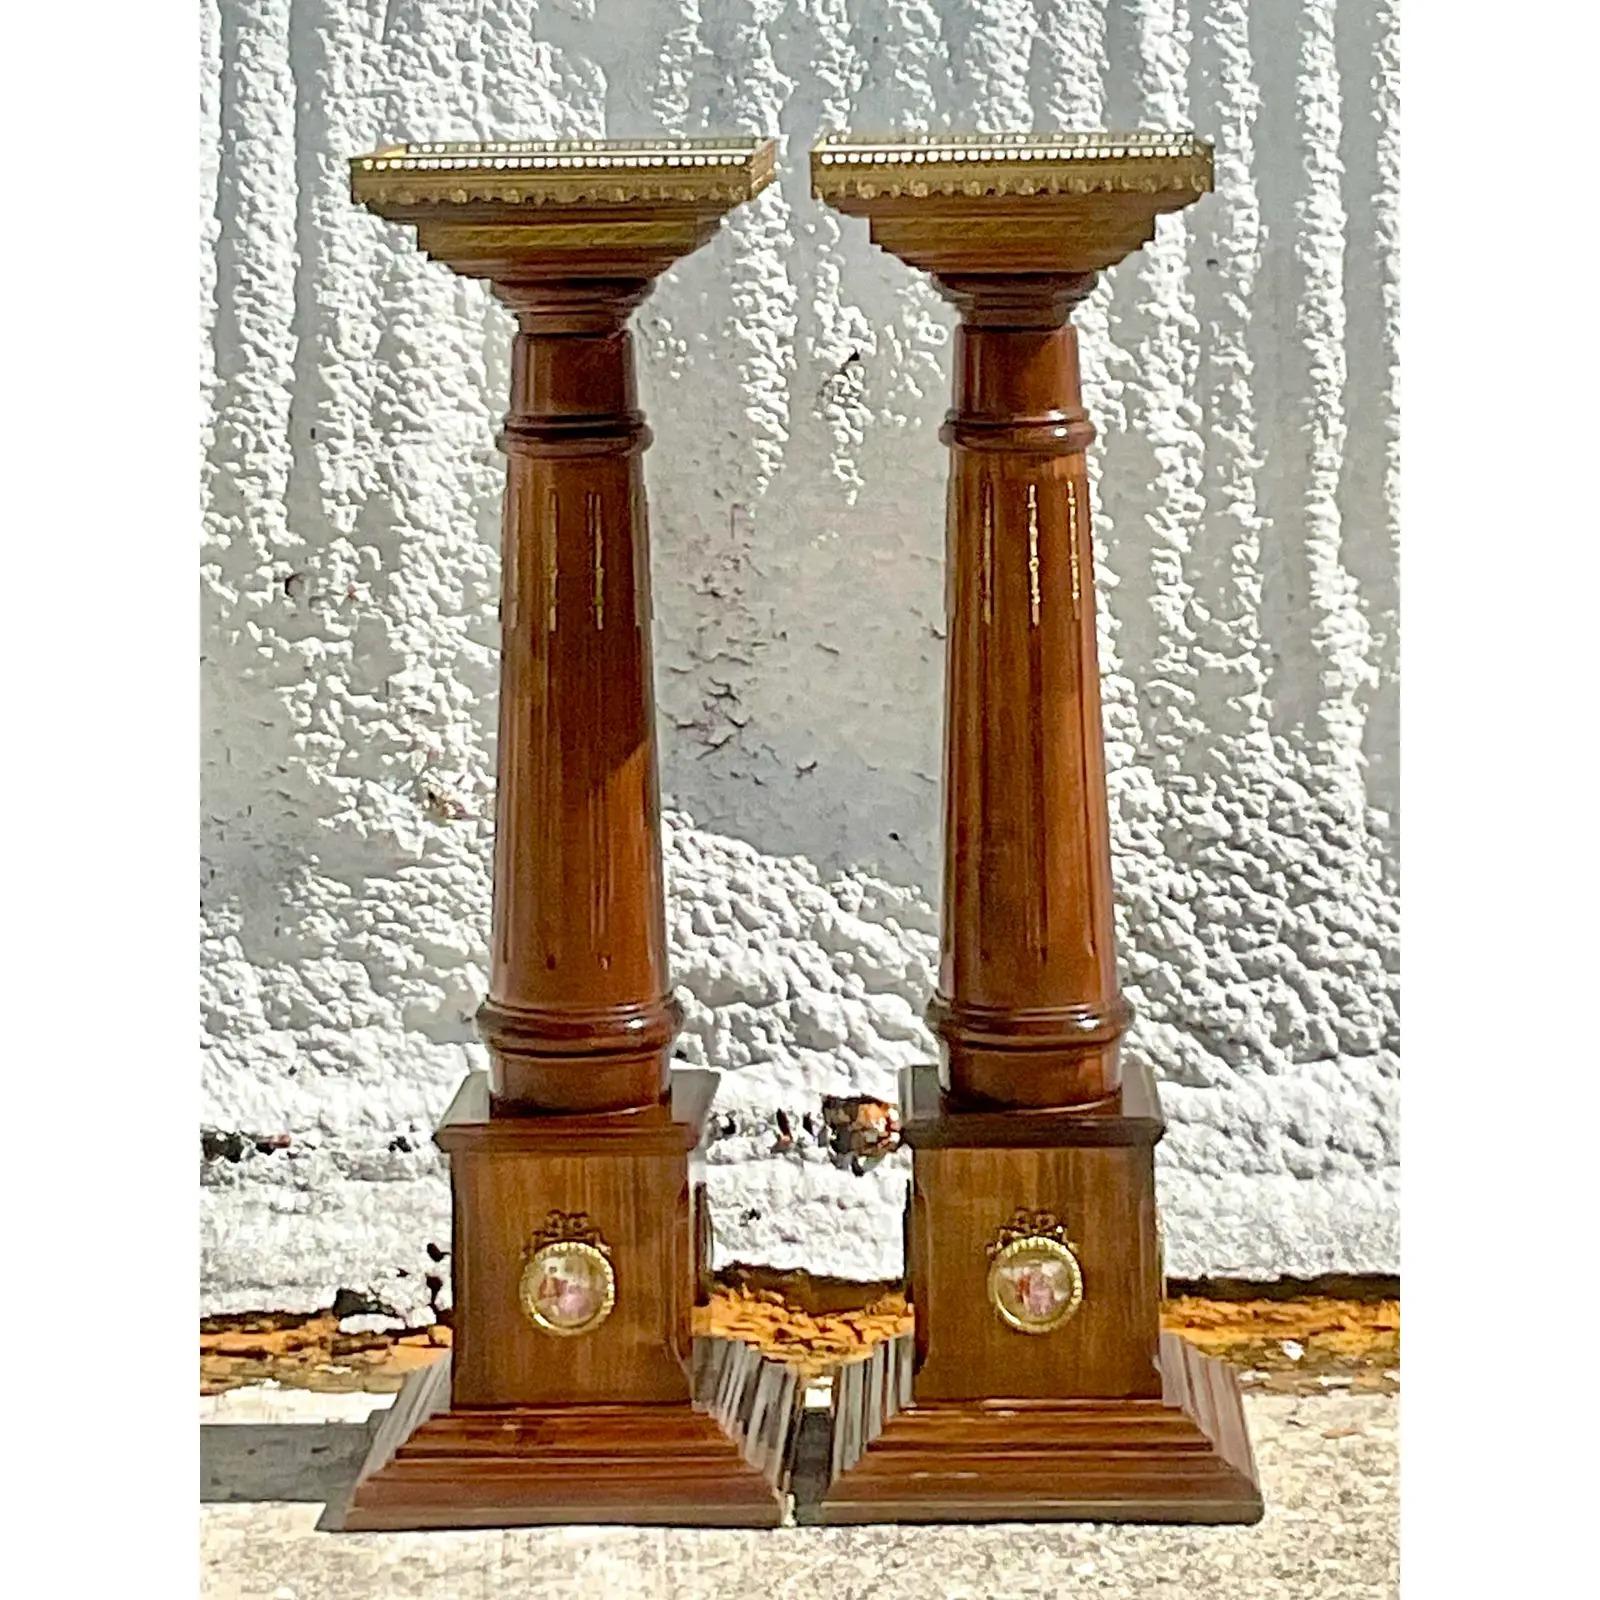 An incredible pair of vintage Regency pedestals. Tall and slender carved wood with the most gorgeous hand painted Wedgwood China cameos around the bottom of the pedestals. Inset marble tops with brass railing. Acquired from a Palm Beach estate.